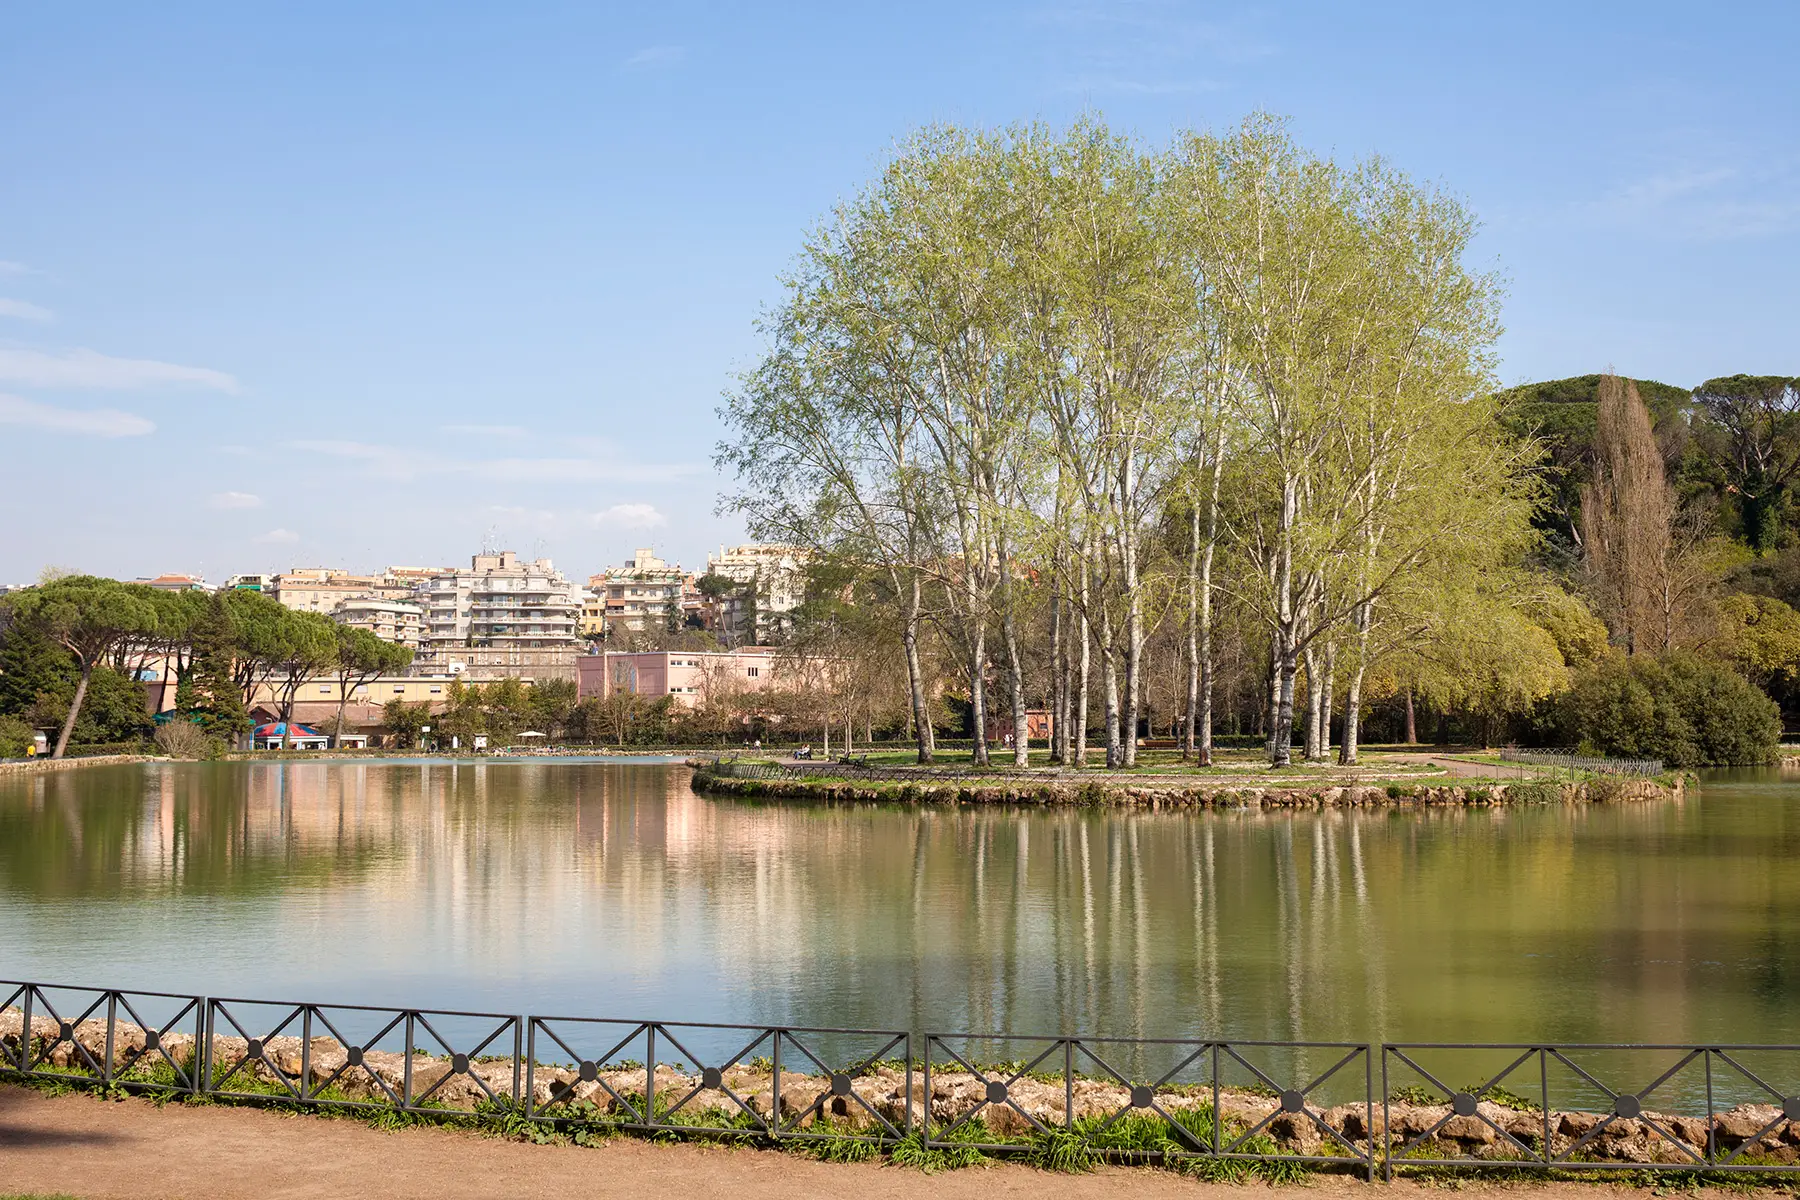 Villa Ada park in Rome – large pond with an island and trees in the middle